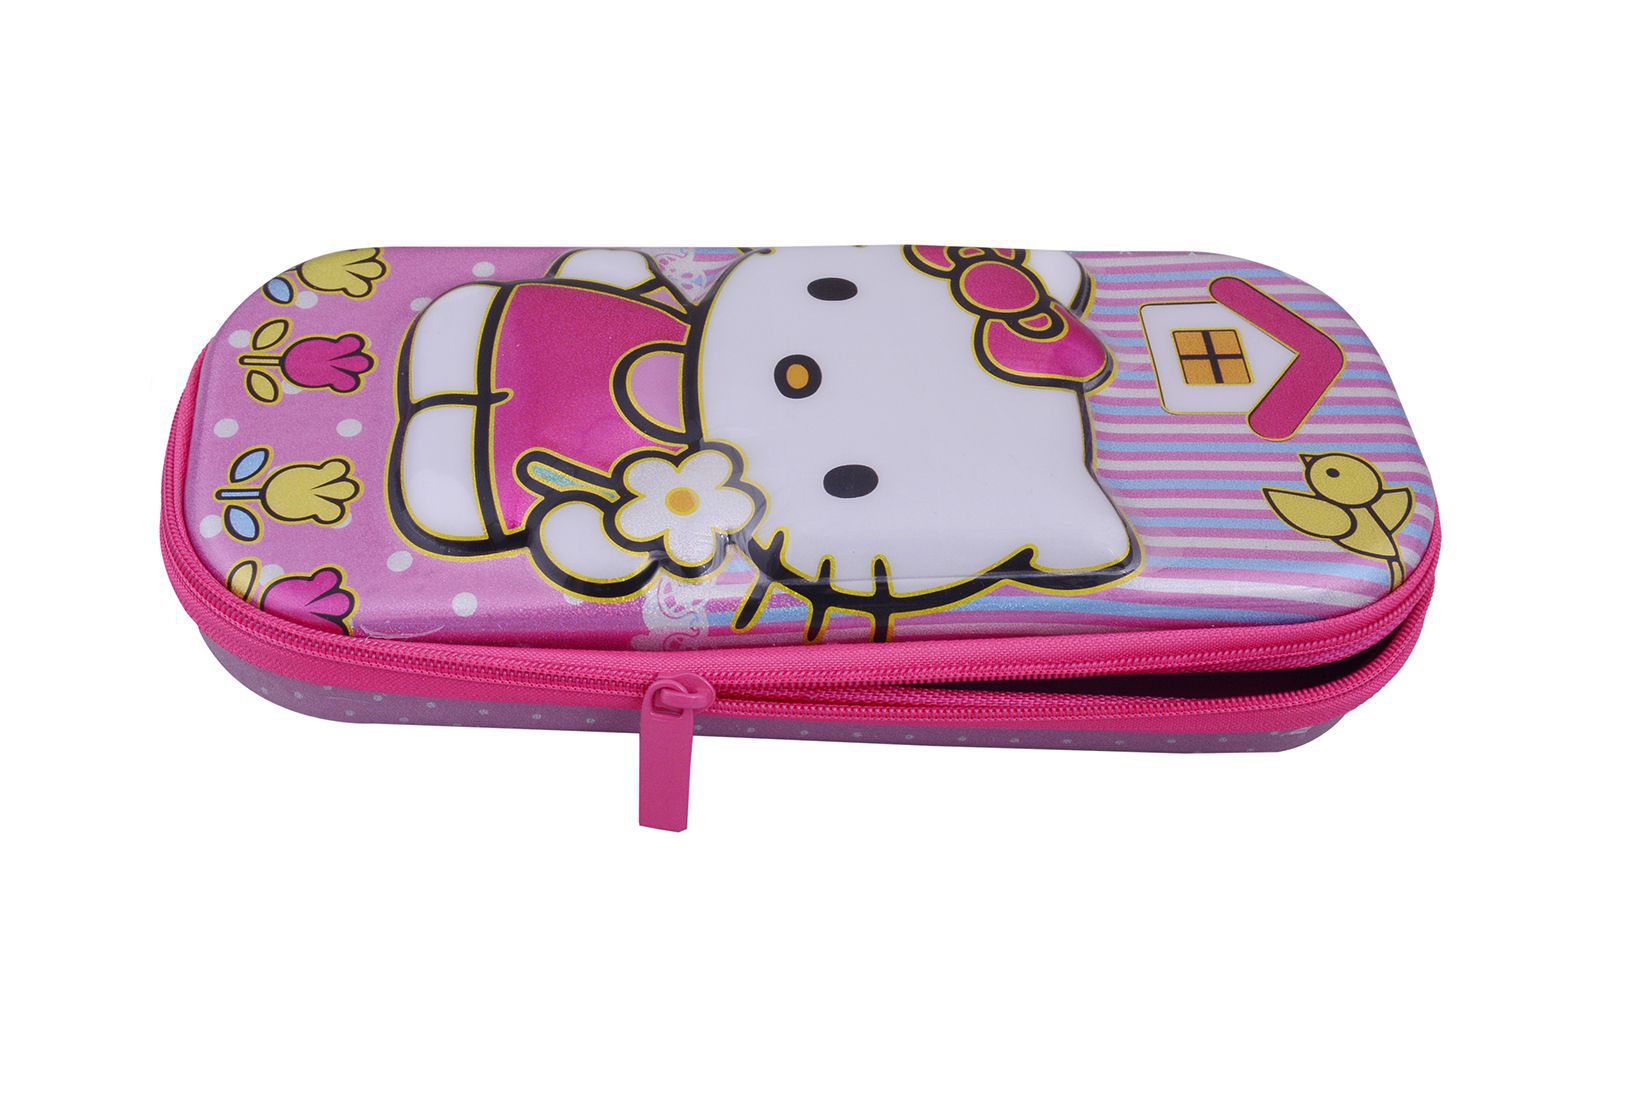 Kitty Cartoon Pencil Box Zip Closing: Buy Online at Best Price in India -  Snapdeal